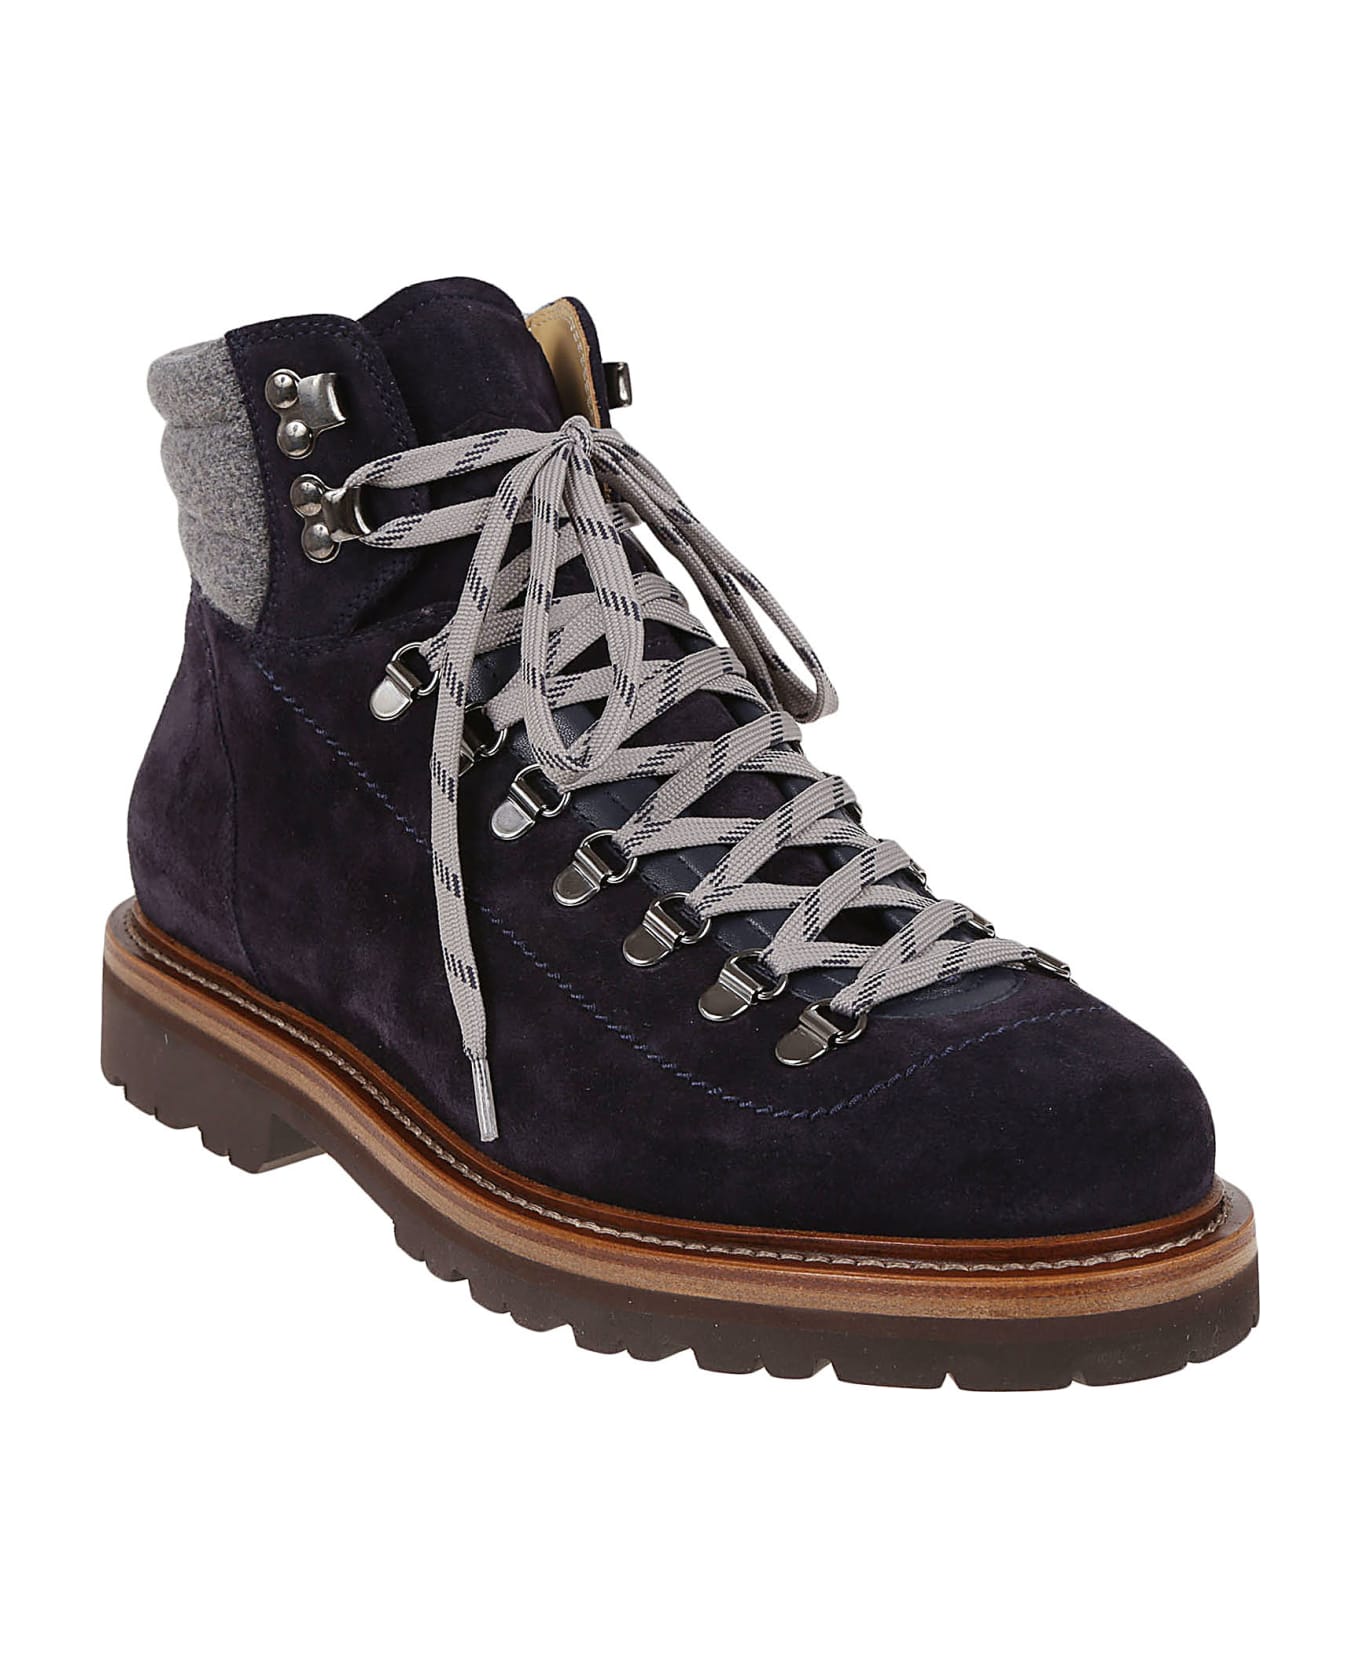 Brunello Cucinelli Boot Mountain Shoe In Soft Suede Leather And Virgin Wool Felt Inserts. Closure With Laces - Cpv46 ブーツ